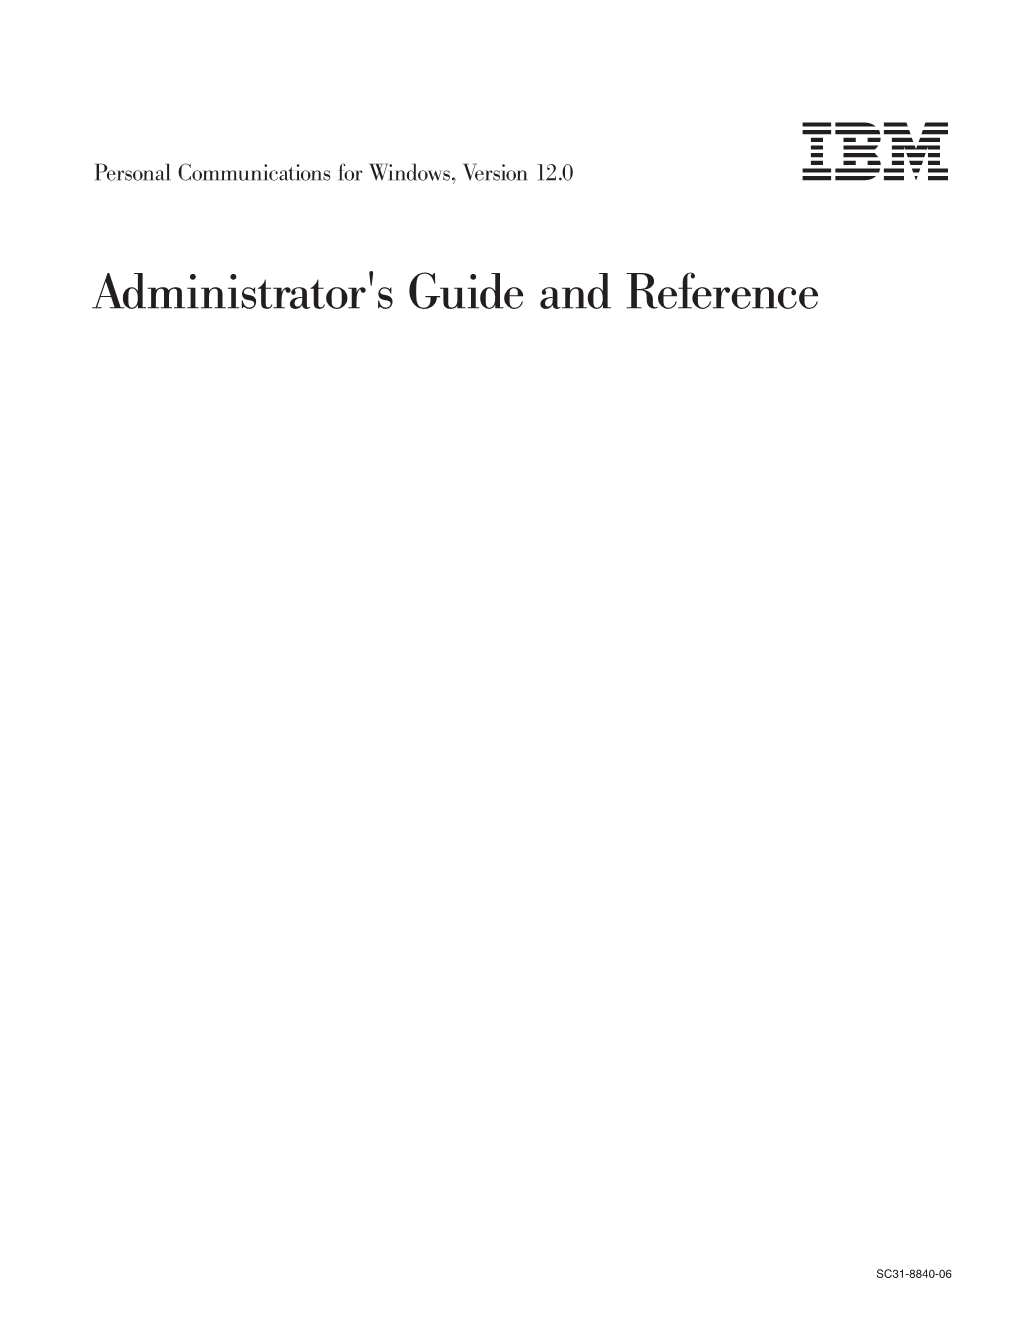 Administrator's Guide and Reference